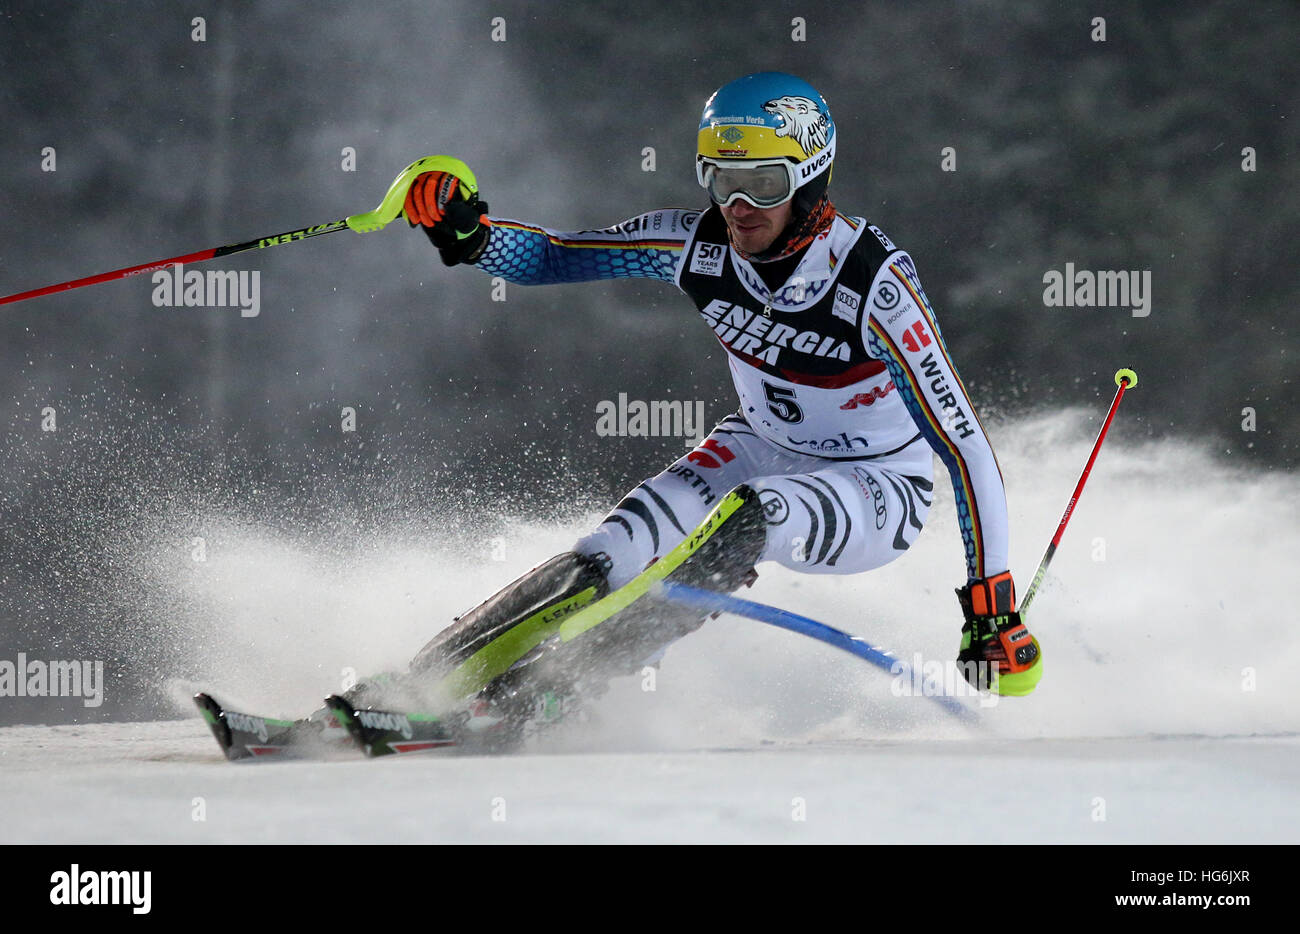 Zagreb, Croatia. 5th Jan, 2017. Felix Neureuther of Germany competes during FIS Alpine Ski World Cup Snow Queen Trophy in Zagreb, capital of Croatia, Jan. 5, 2017. Felix Neureuther got the 2nd place. © Jurica Galovic/Xinhua/Alamy Live News Stock Photo